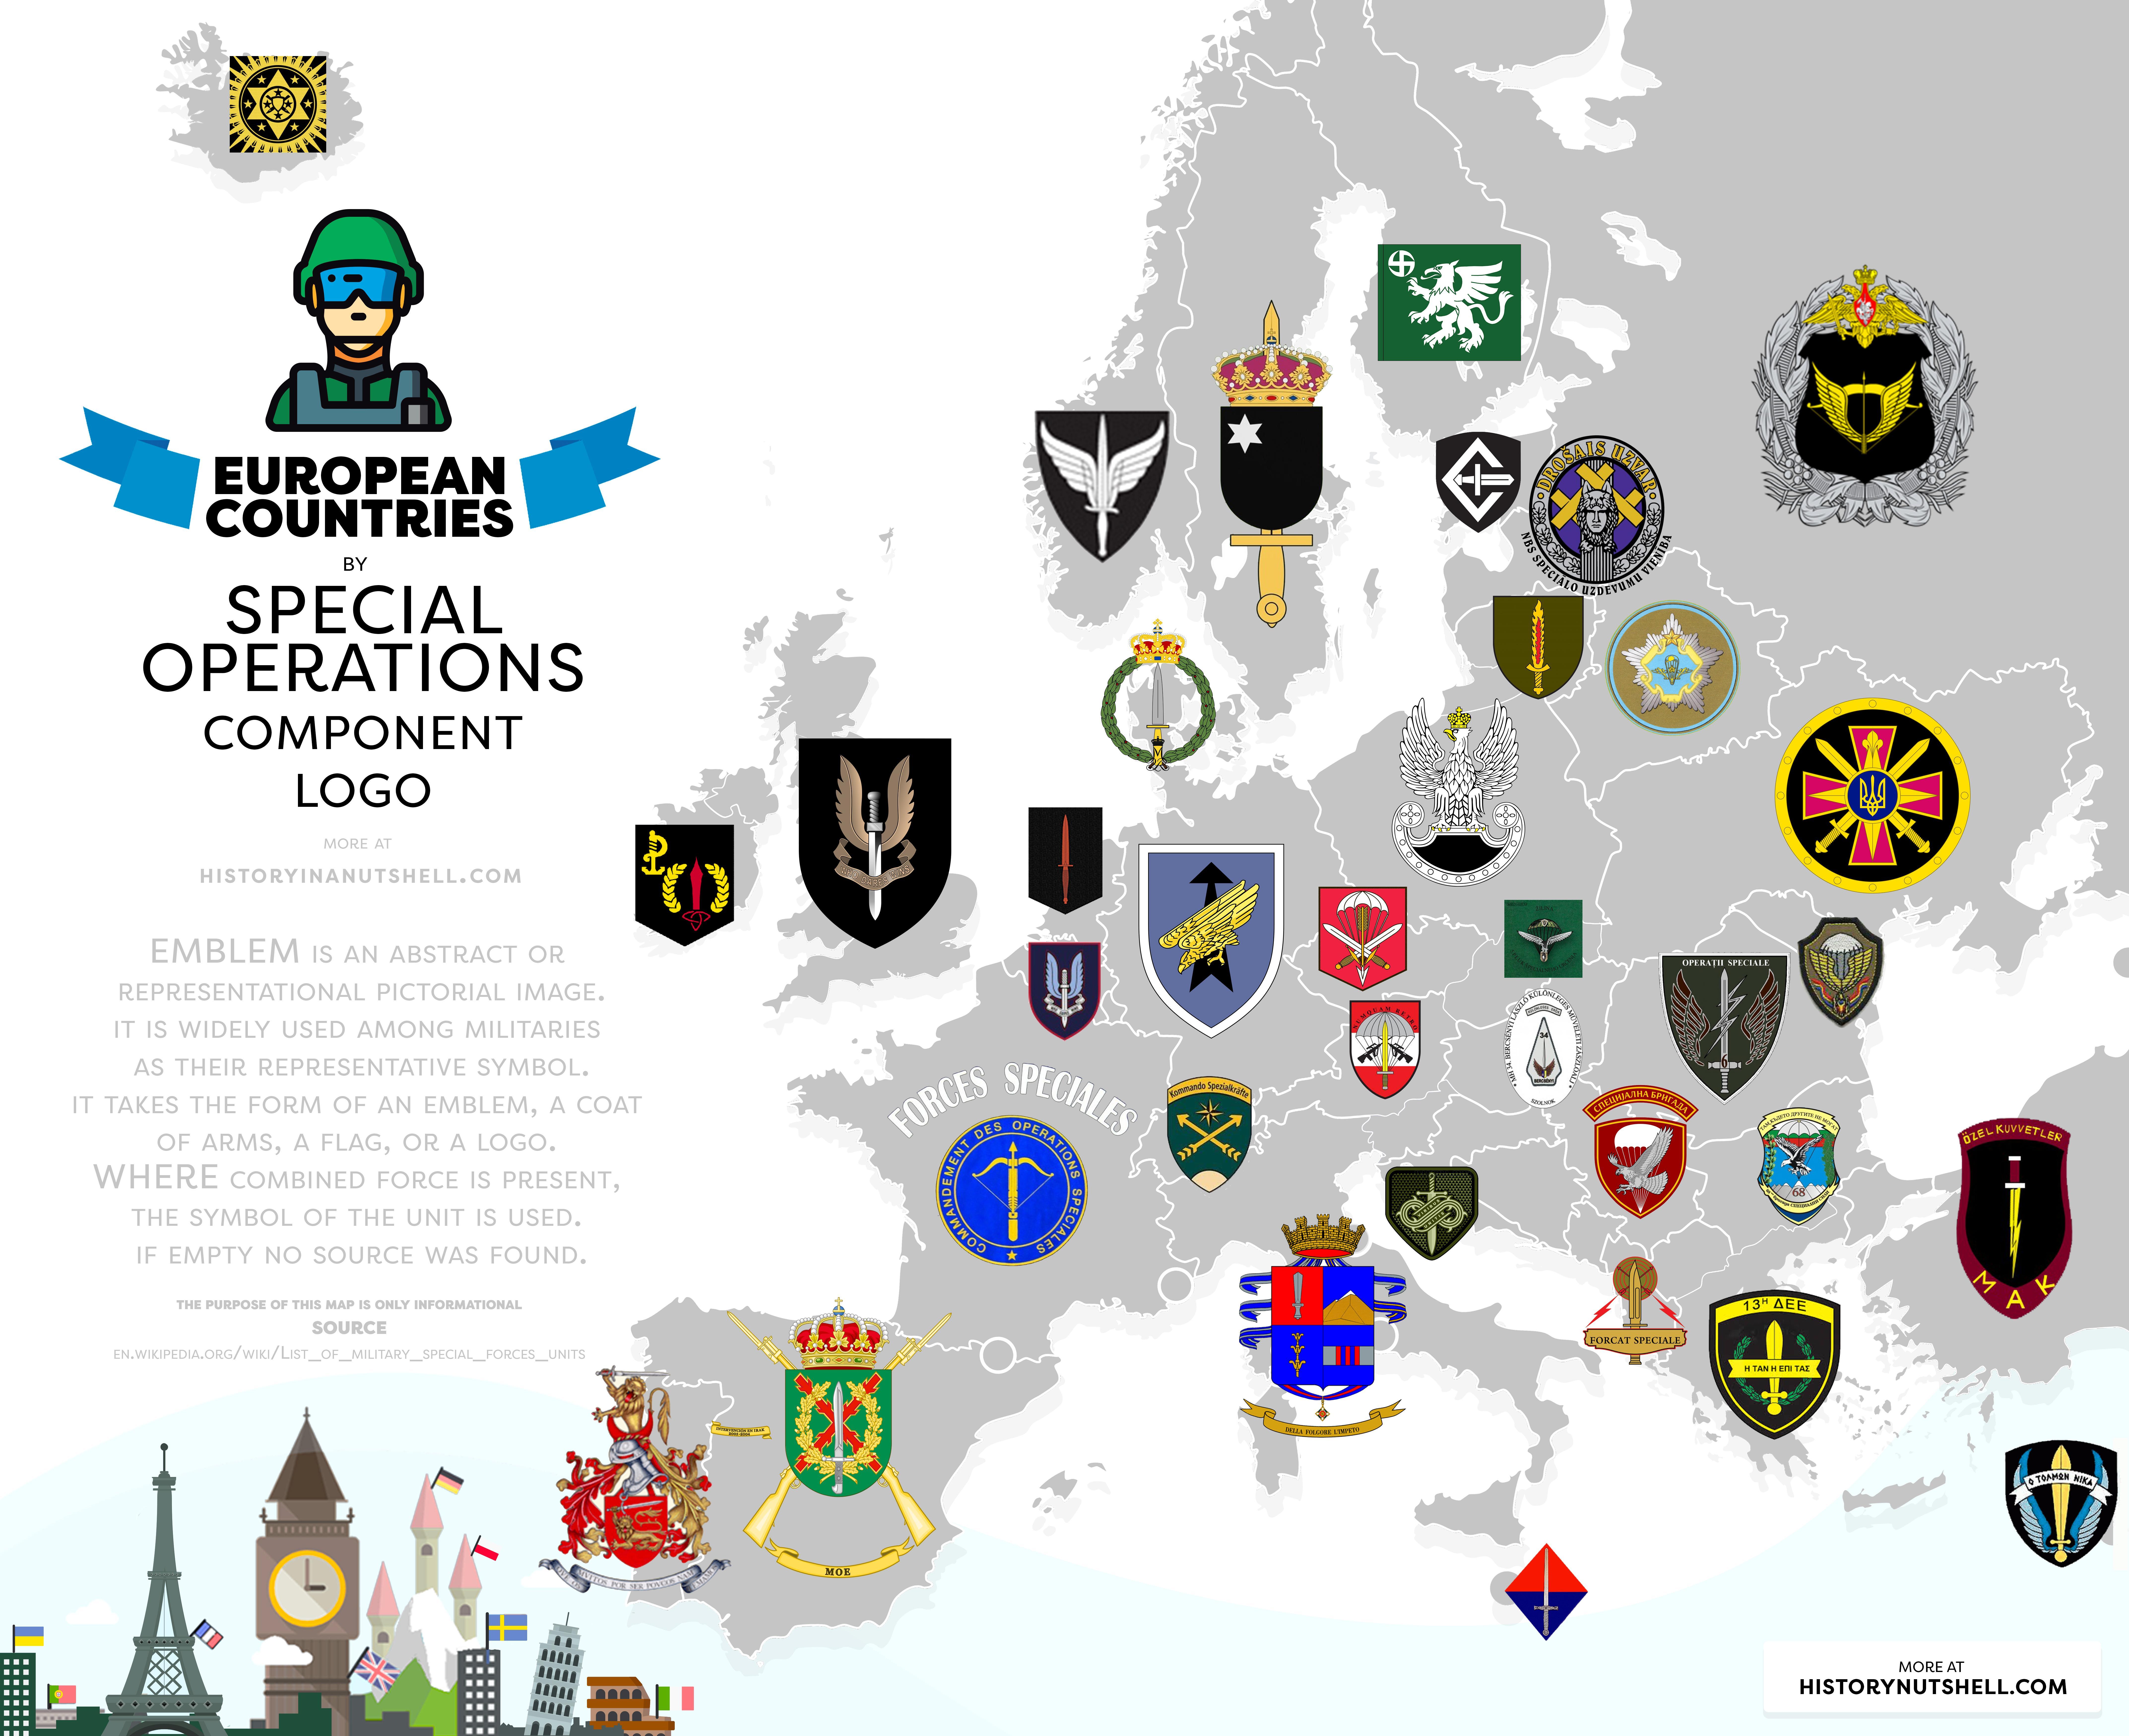 Special Forces Logo - European Countries by special forces logo [8582 × 6999] : MapPorn